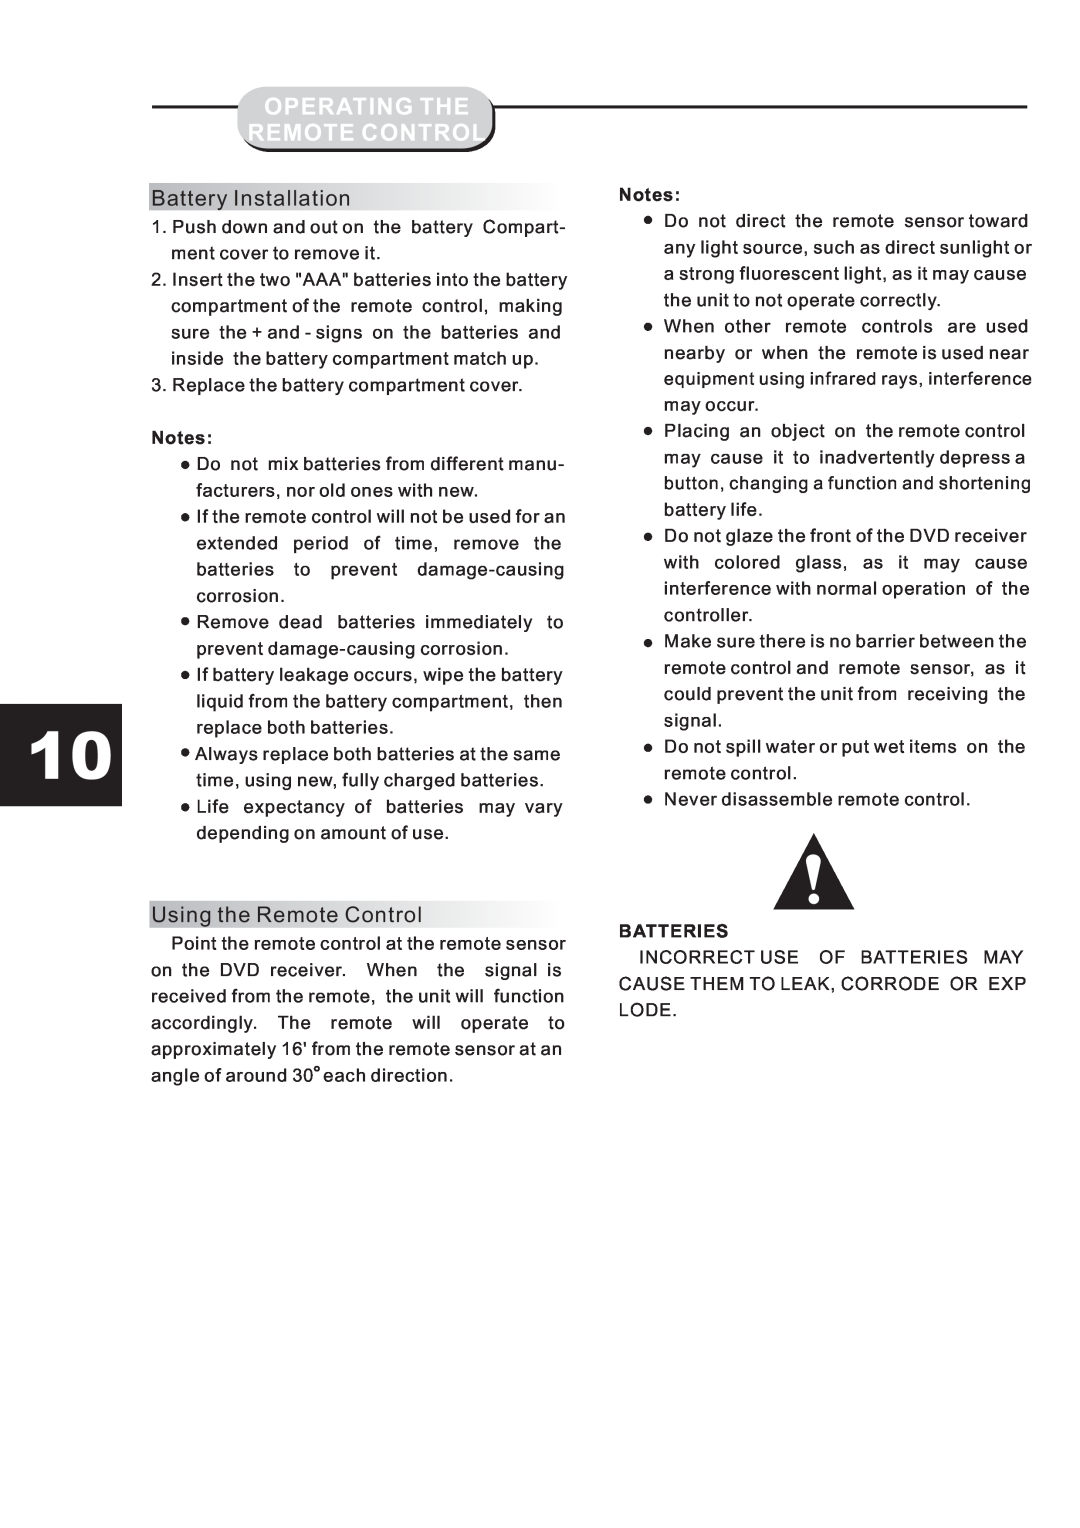 Eltax HT-153 instruction manual Operating The Remote Control, Battery Installation, Using the Remote Control, Batteries 